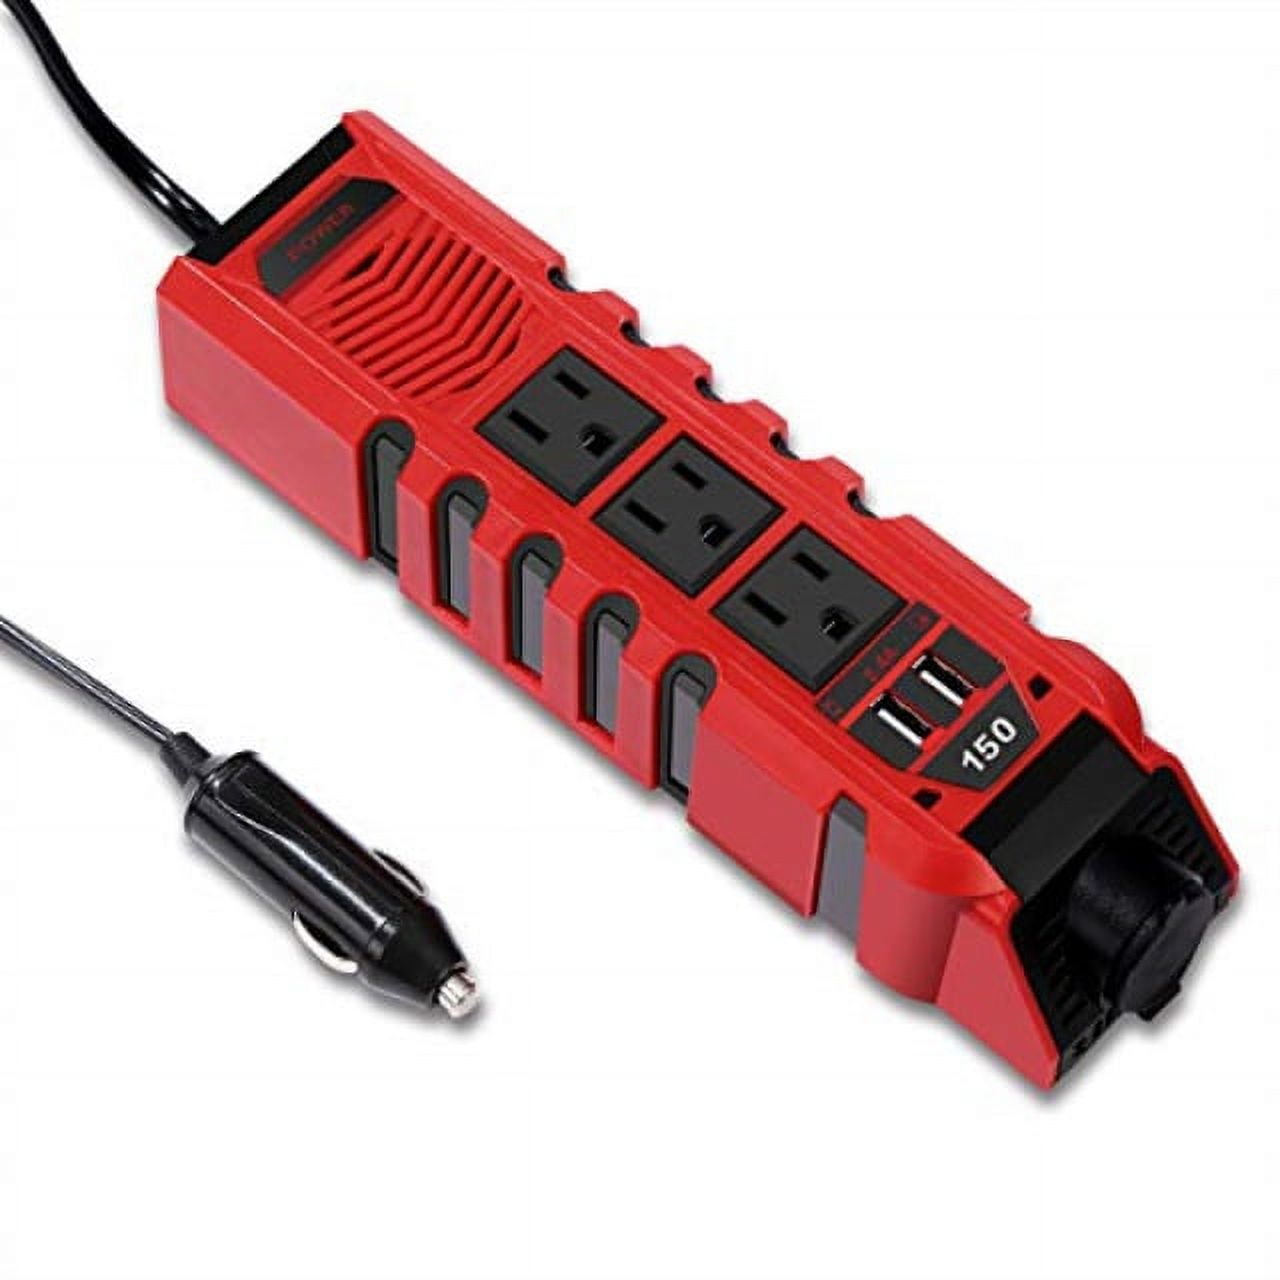 Yyton 400W Power Inverter for Vehicles DC 12V to 110V AC Car Inverter  Converter with 4.2A Dual USB Charging Ports, 2 AC Outlets Car Plug Adapter  for